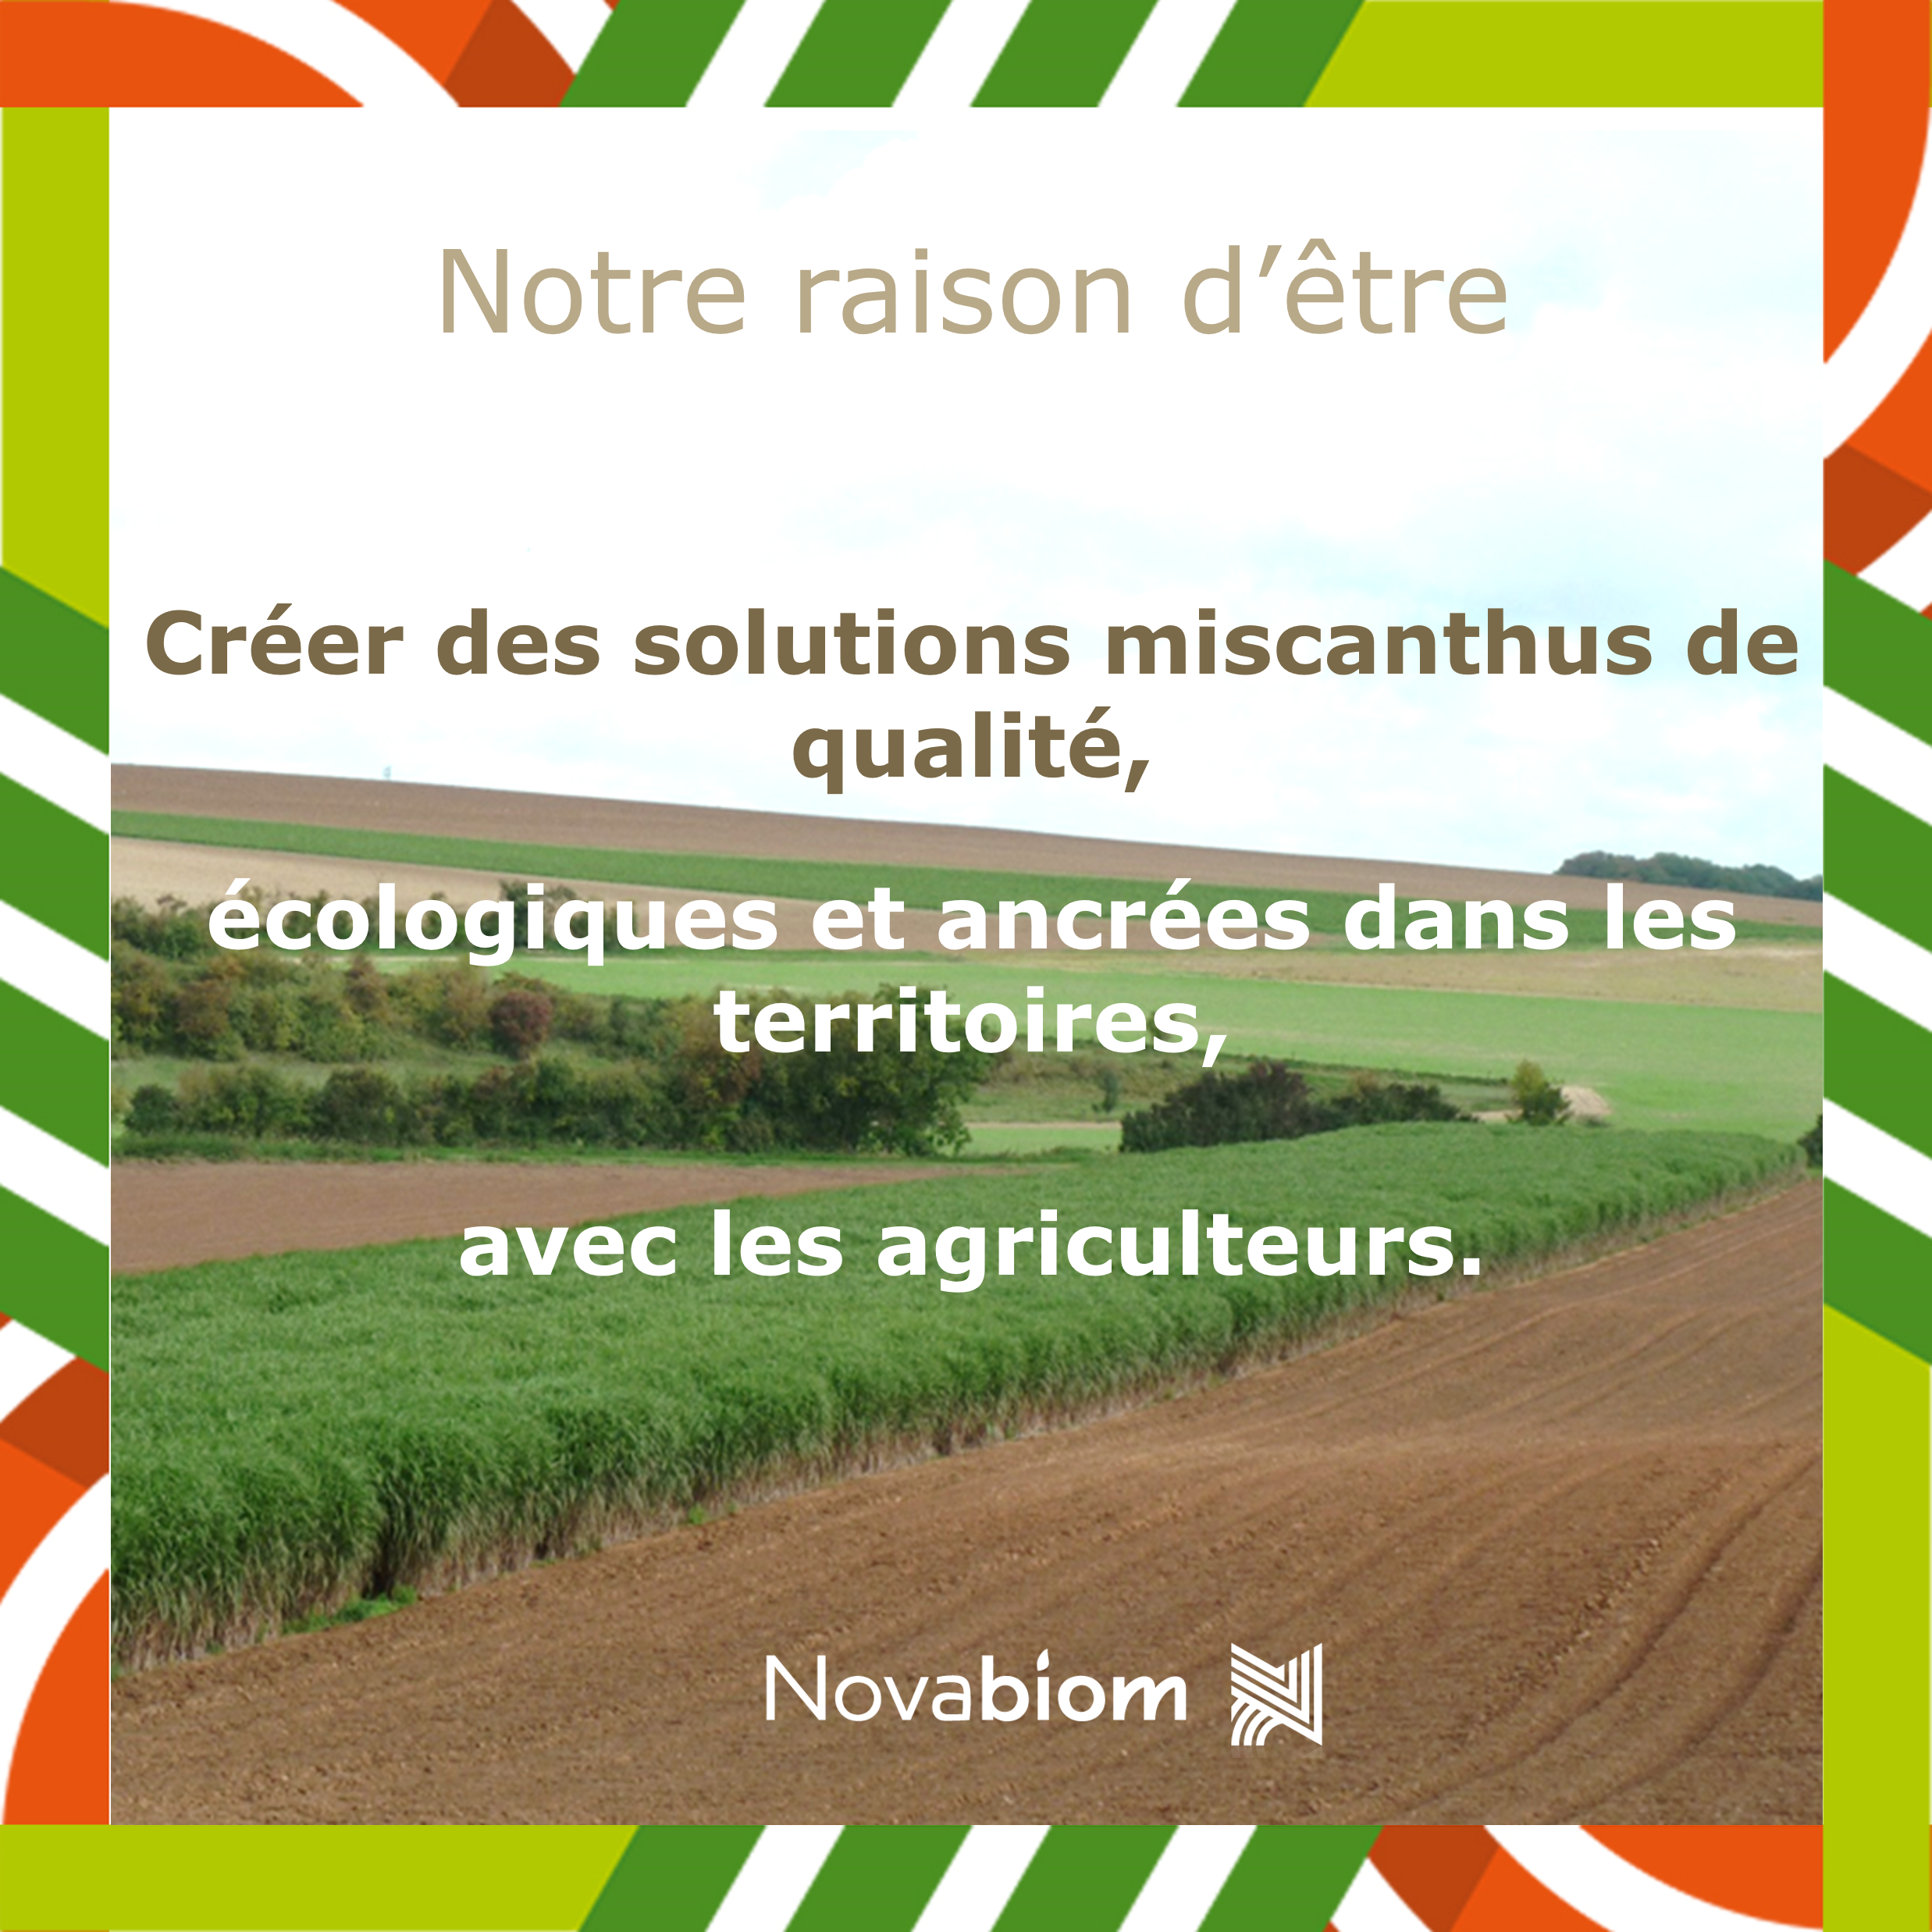 Our raison d&#039;être Creating high-quality, environmentally-friendly miscanthus solutions that are rooted in the local area, in partnership with farmers.